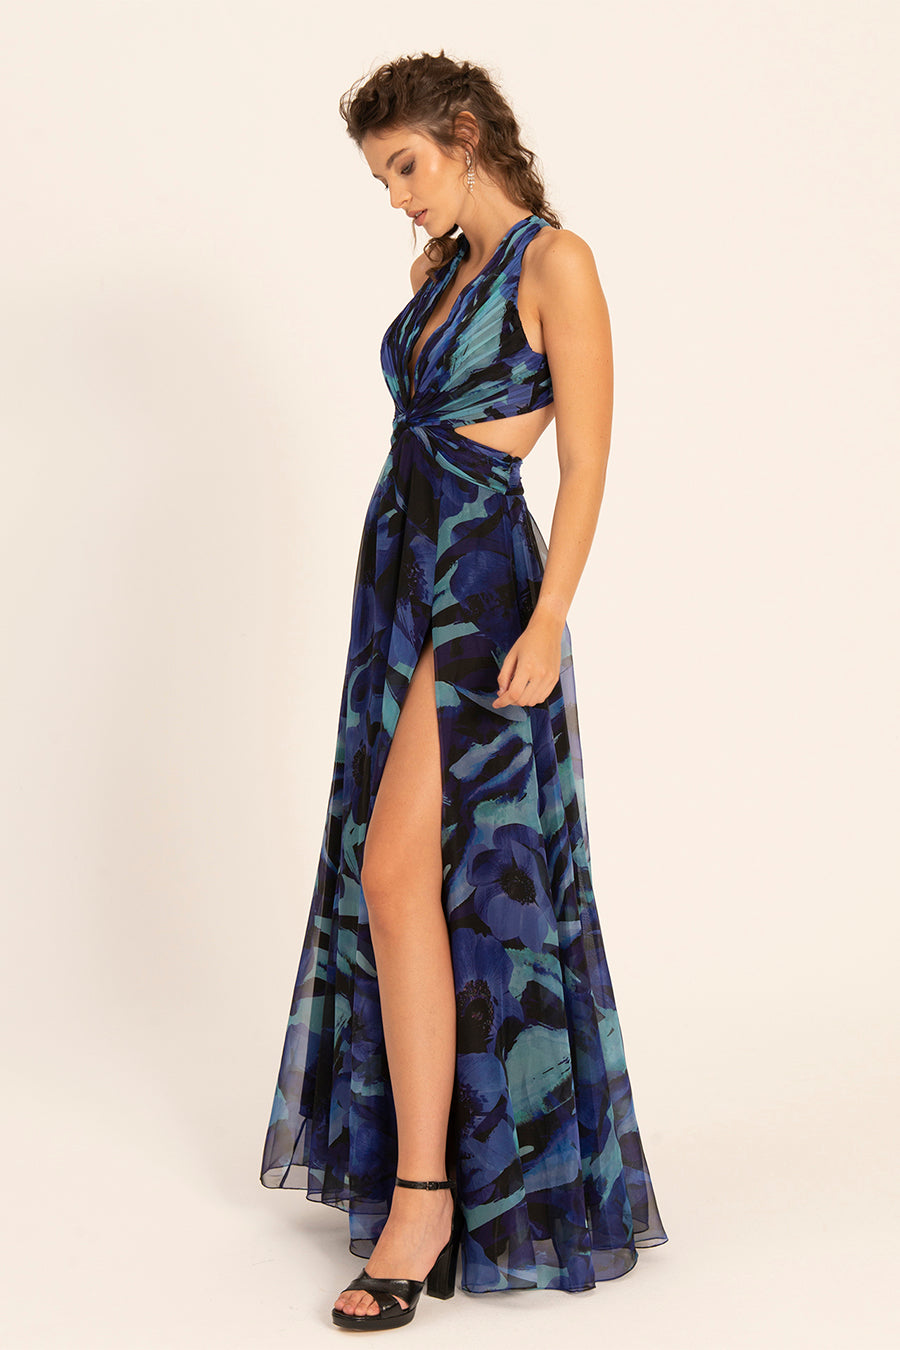 Alyne - Mystic Evenings | Evening and Prom Dresses